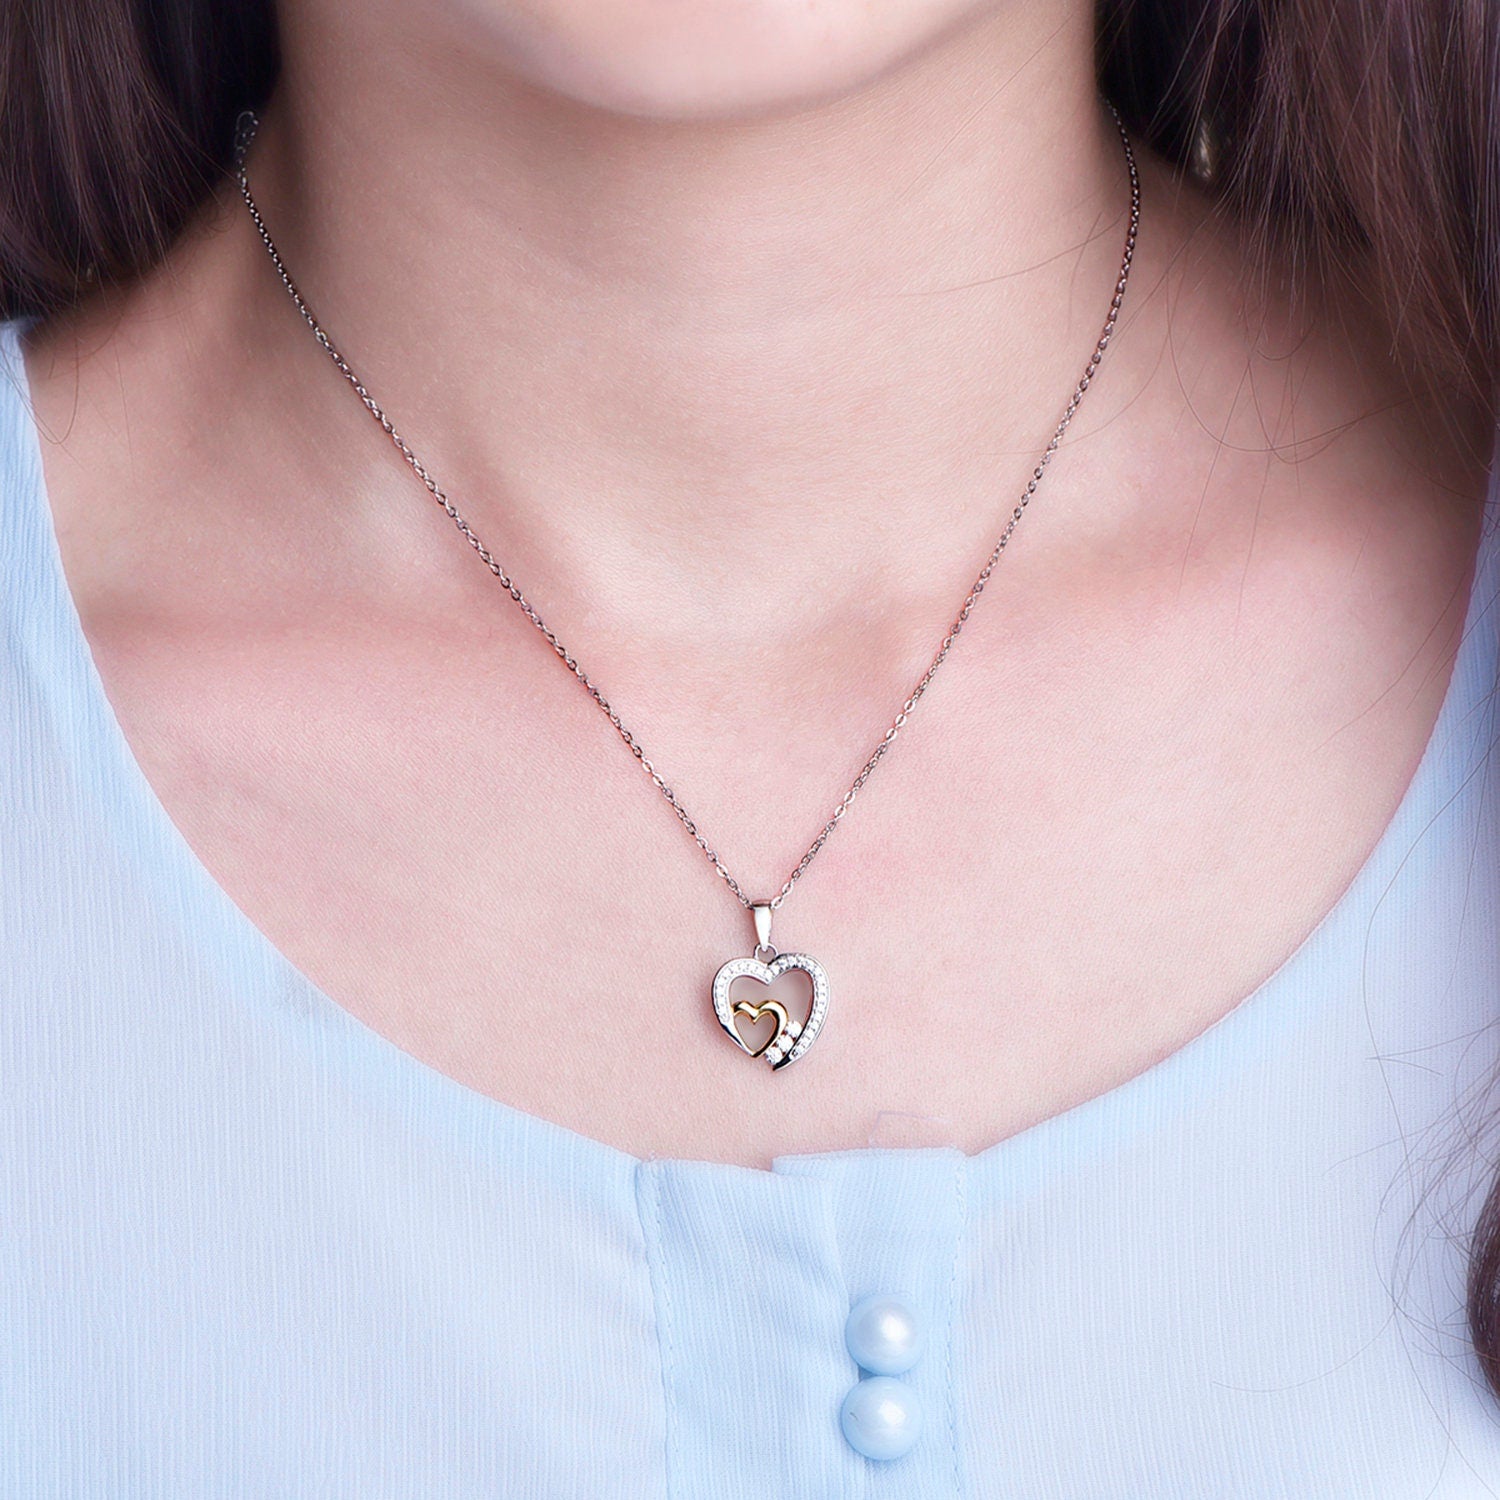 Brook - Delicate Two Tone Double Heart Necklaces •Link Chain • Choker Necklace, Satellite Necklace